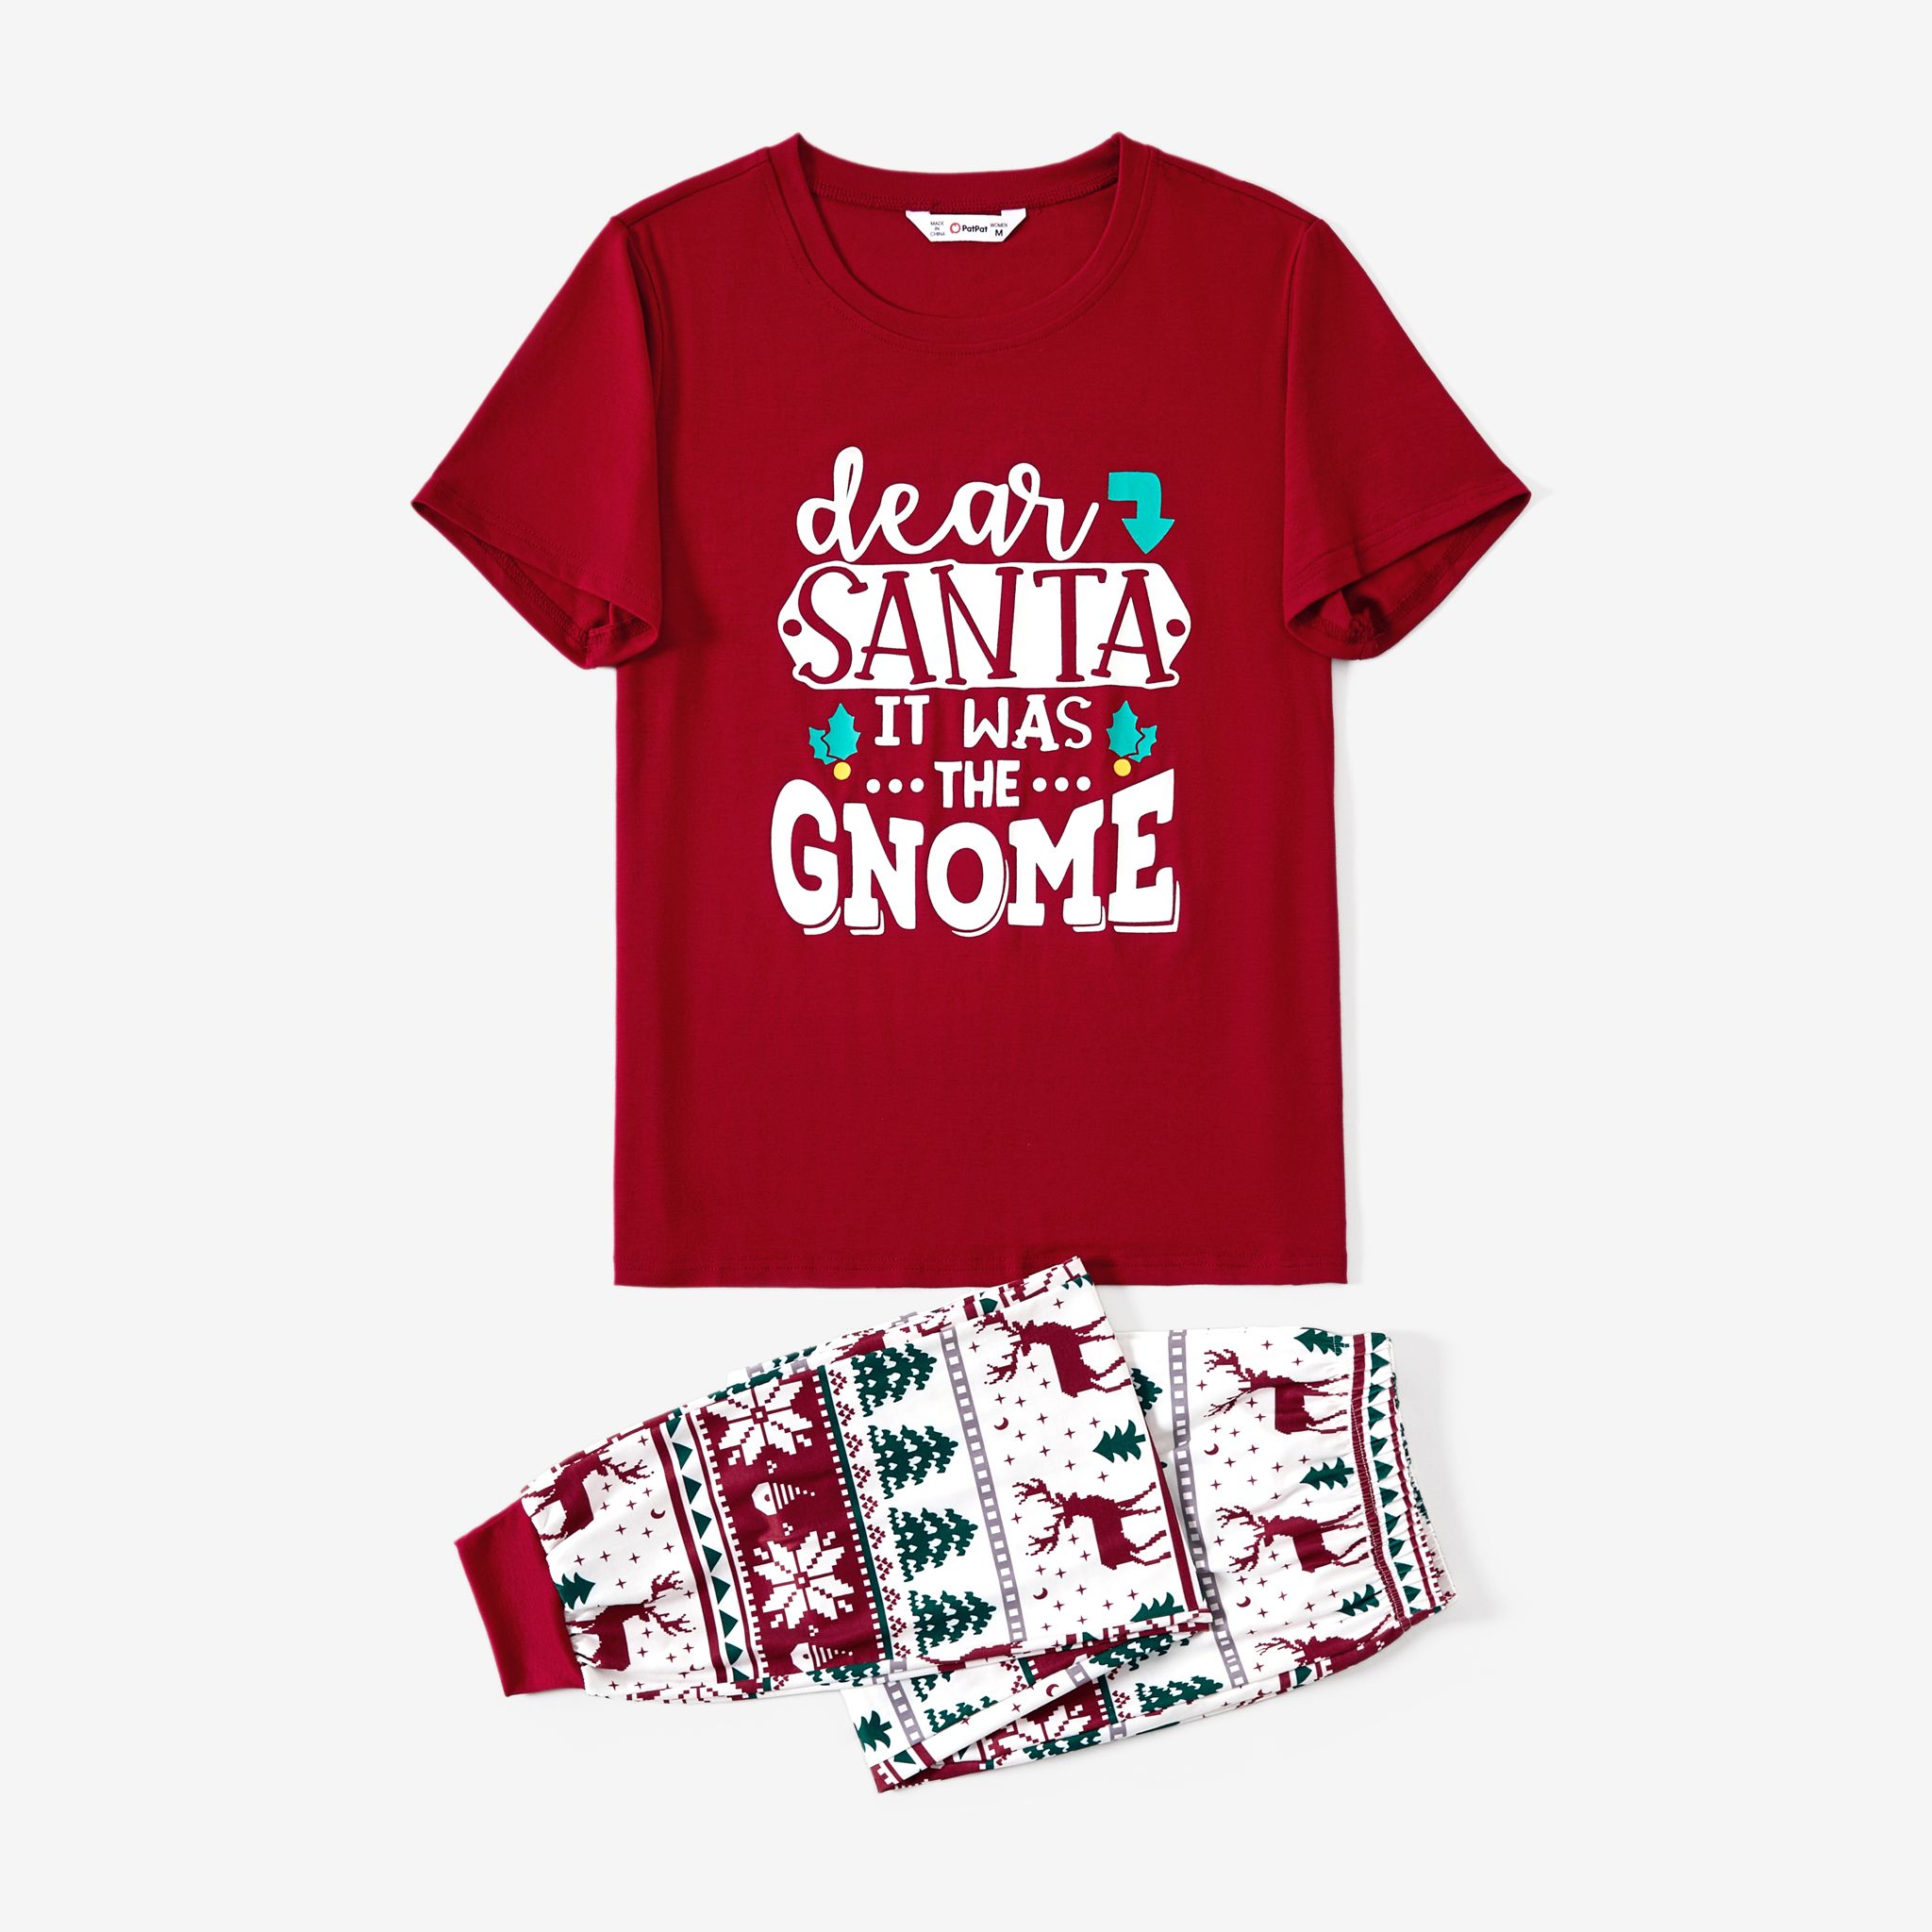 Christmas Family Matching Festival Theme&Letters Print Short-sleeve Pajamas Sets(Flame Resistant)